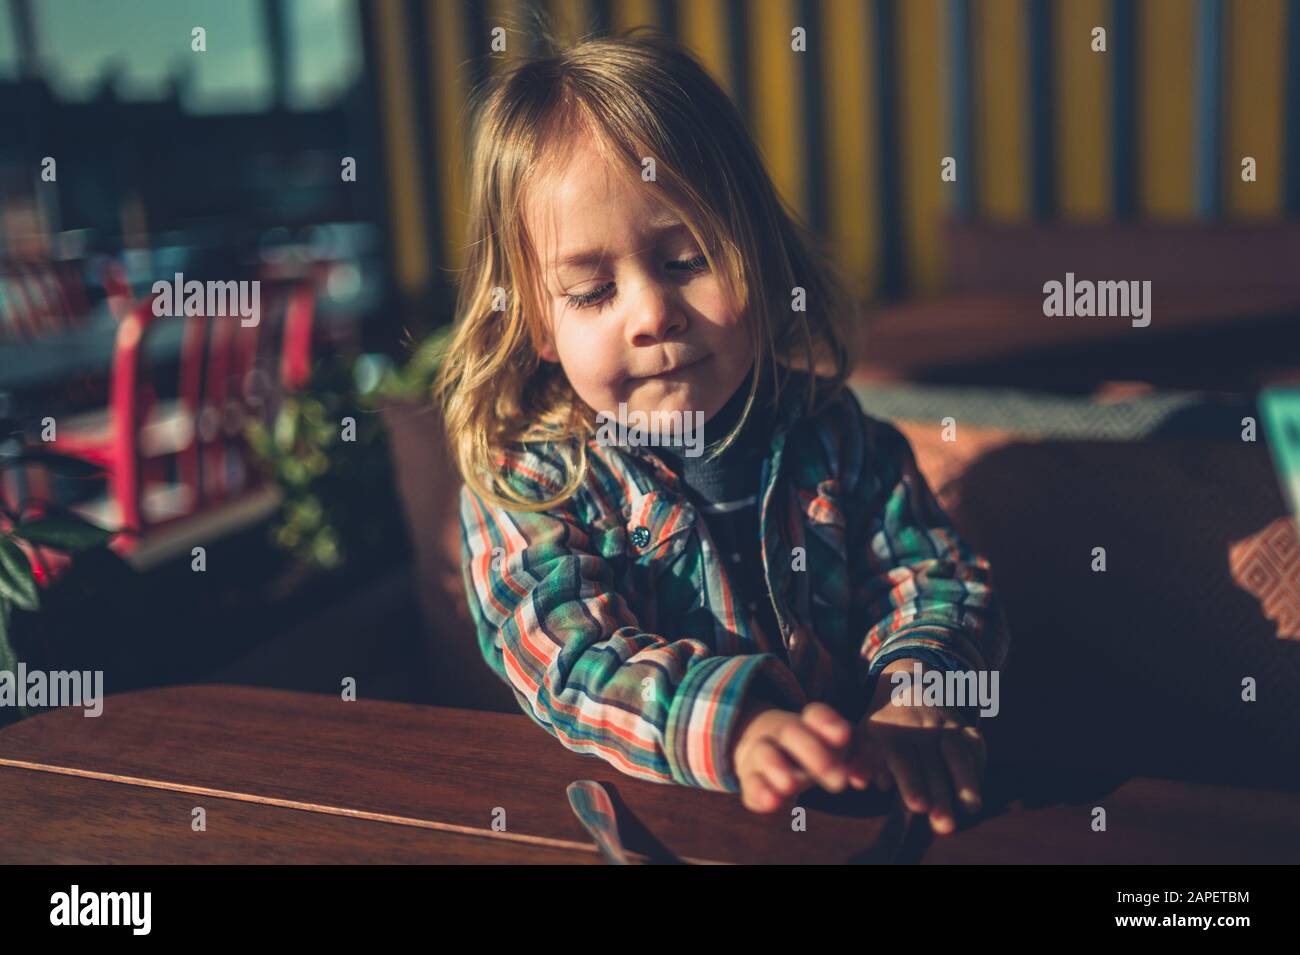 A little toddler is sitting at a cafe table with cutlery in front of him Stock Photo